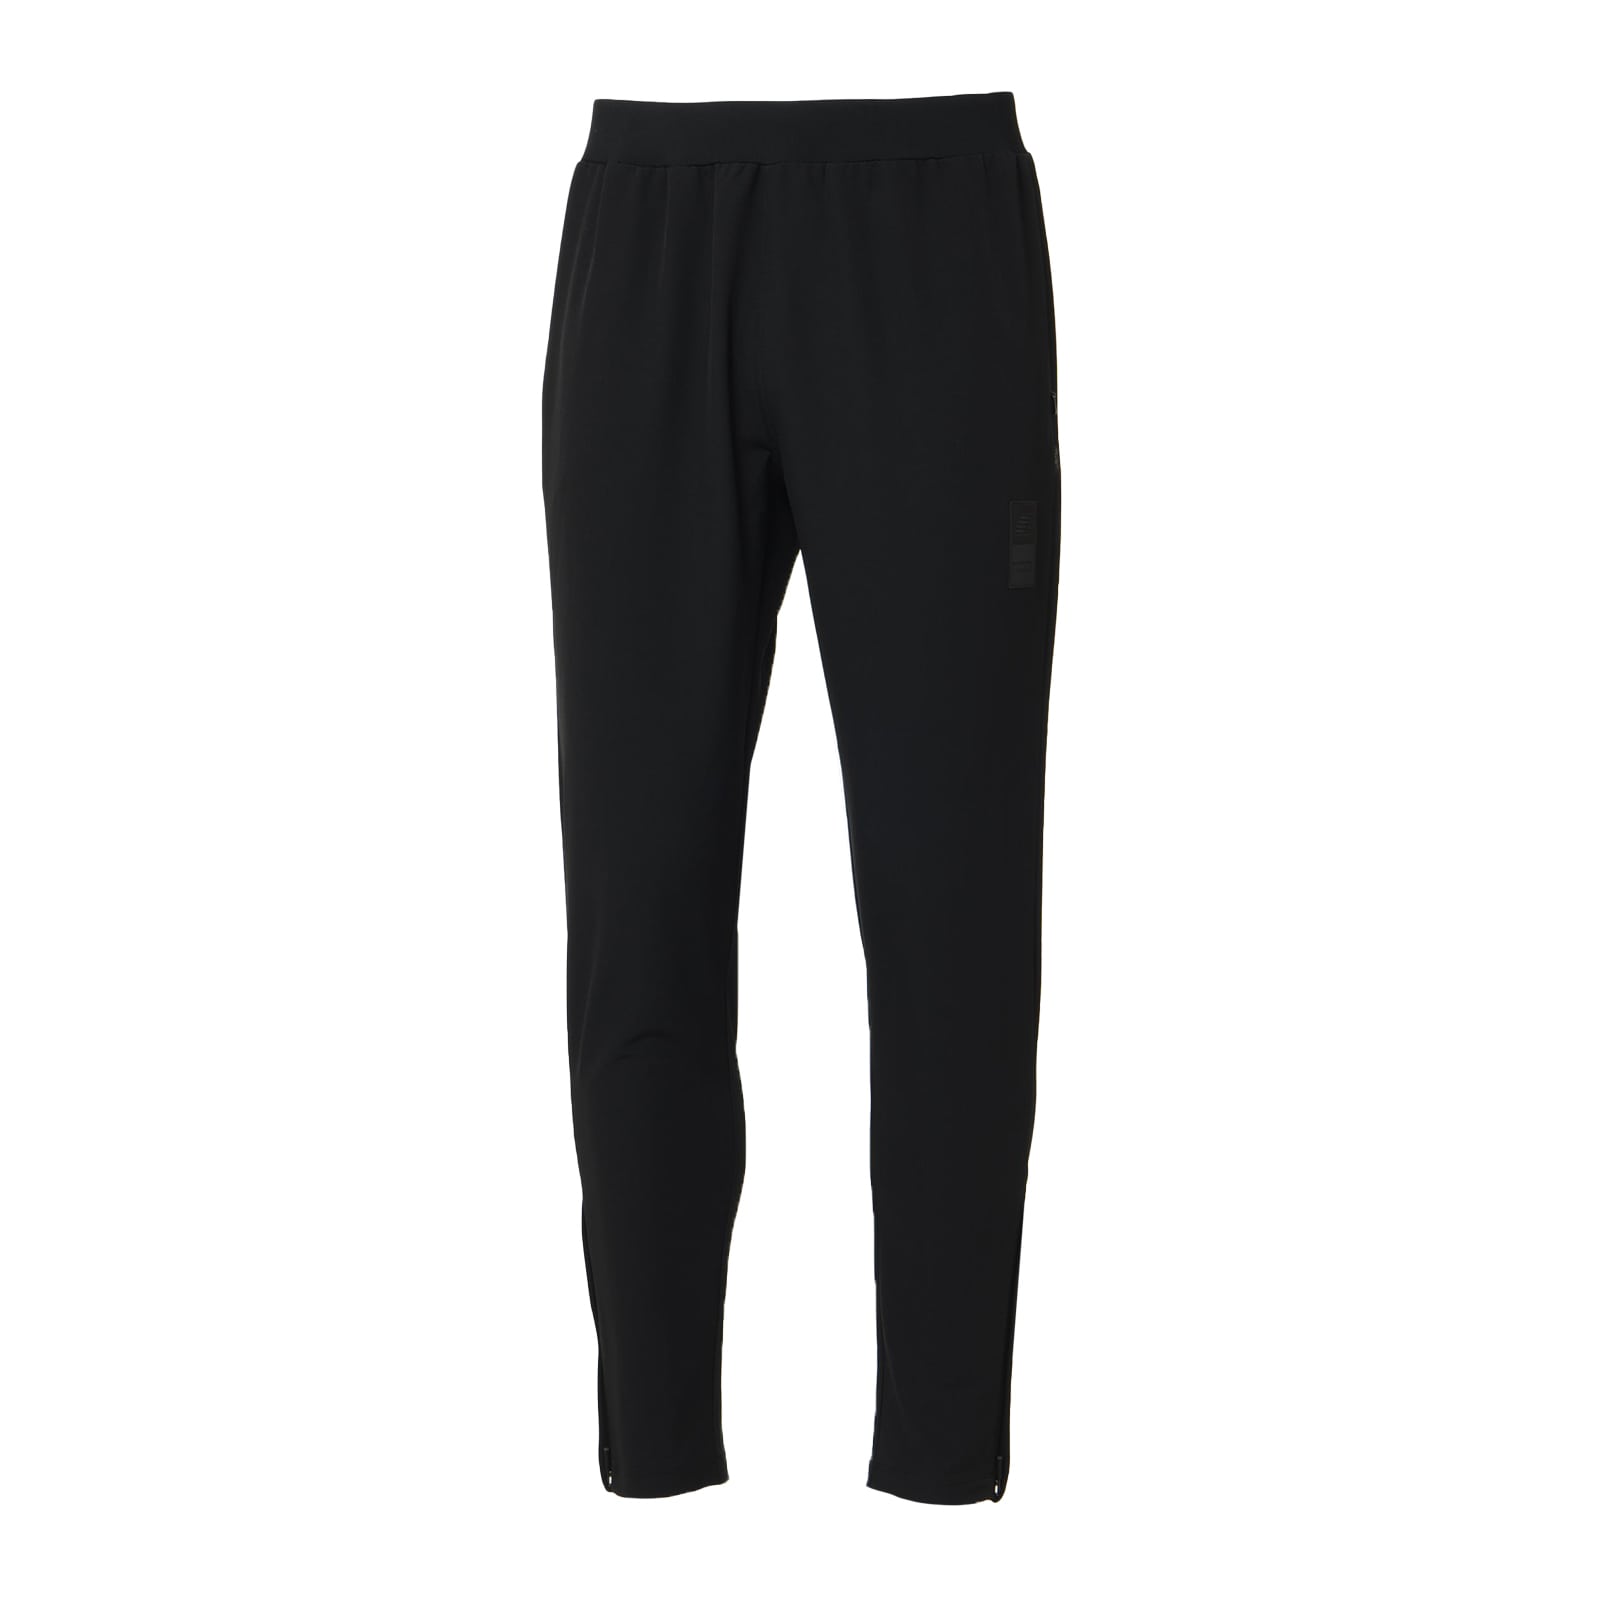 Black Out Collection Stretch Woven Pants Athletic